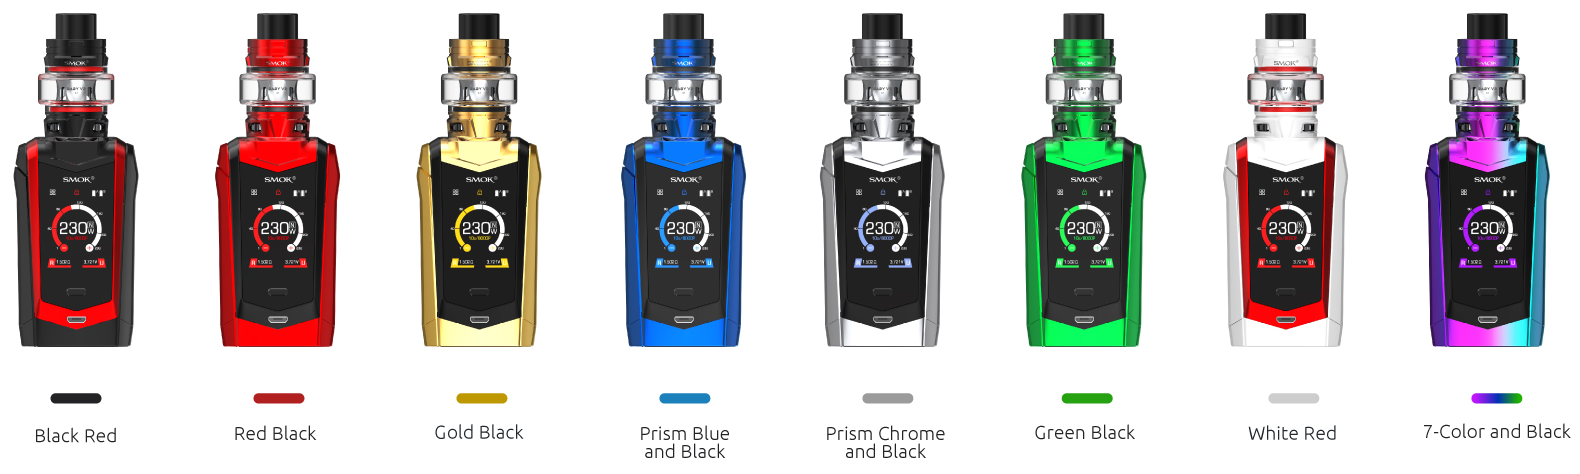 8 Colors Available for SMOK Species Kit